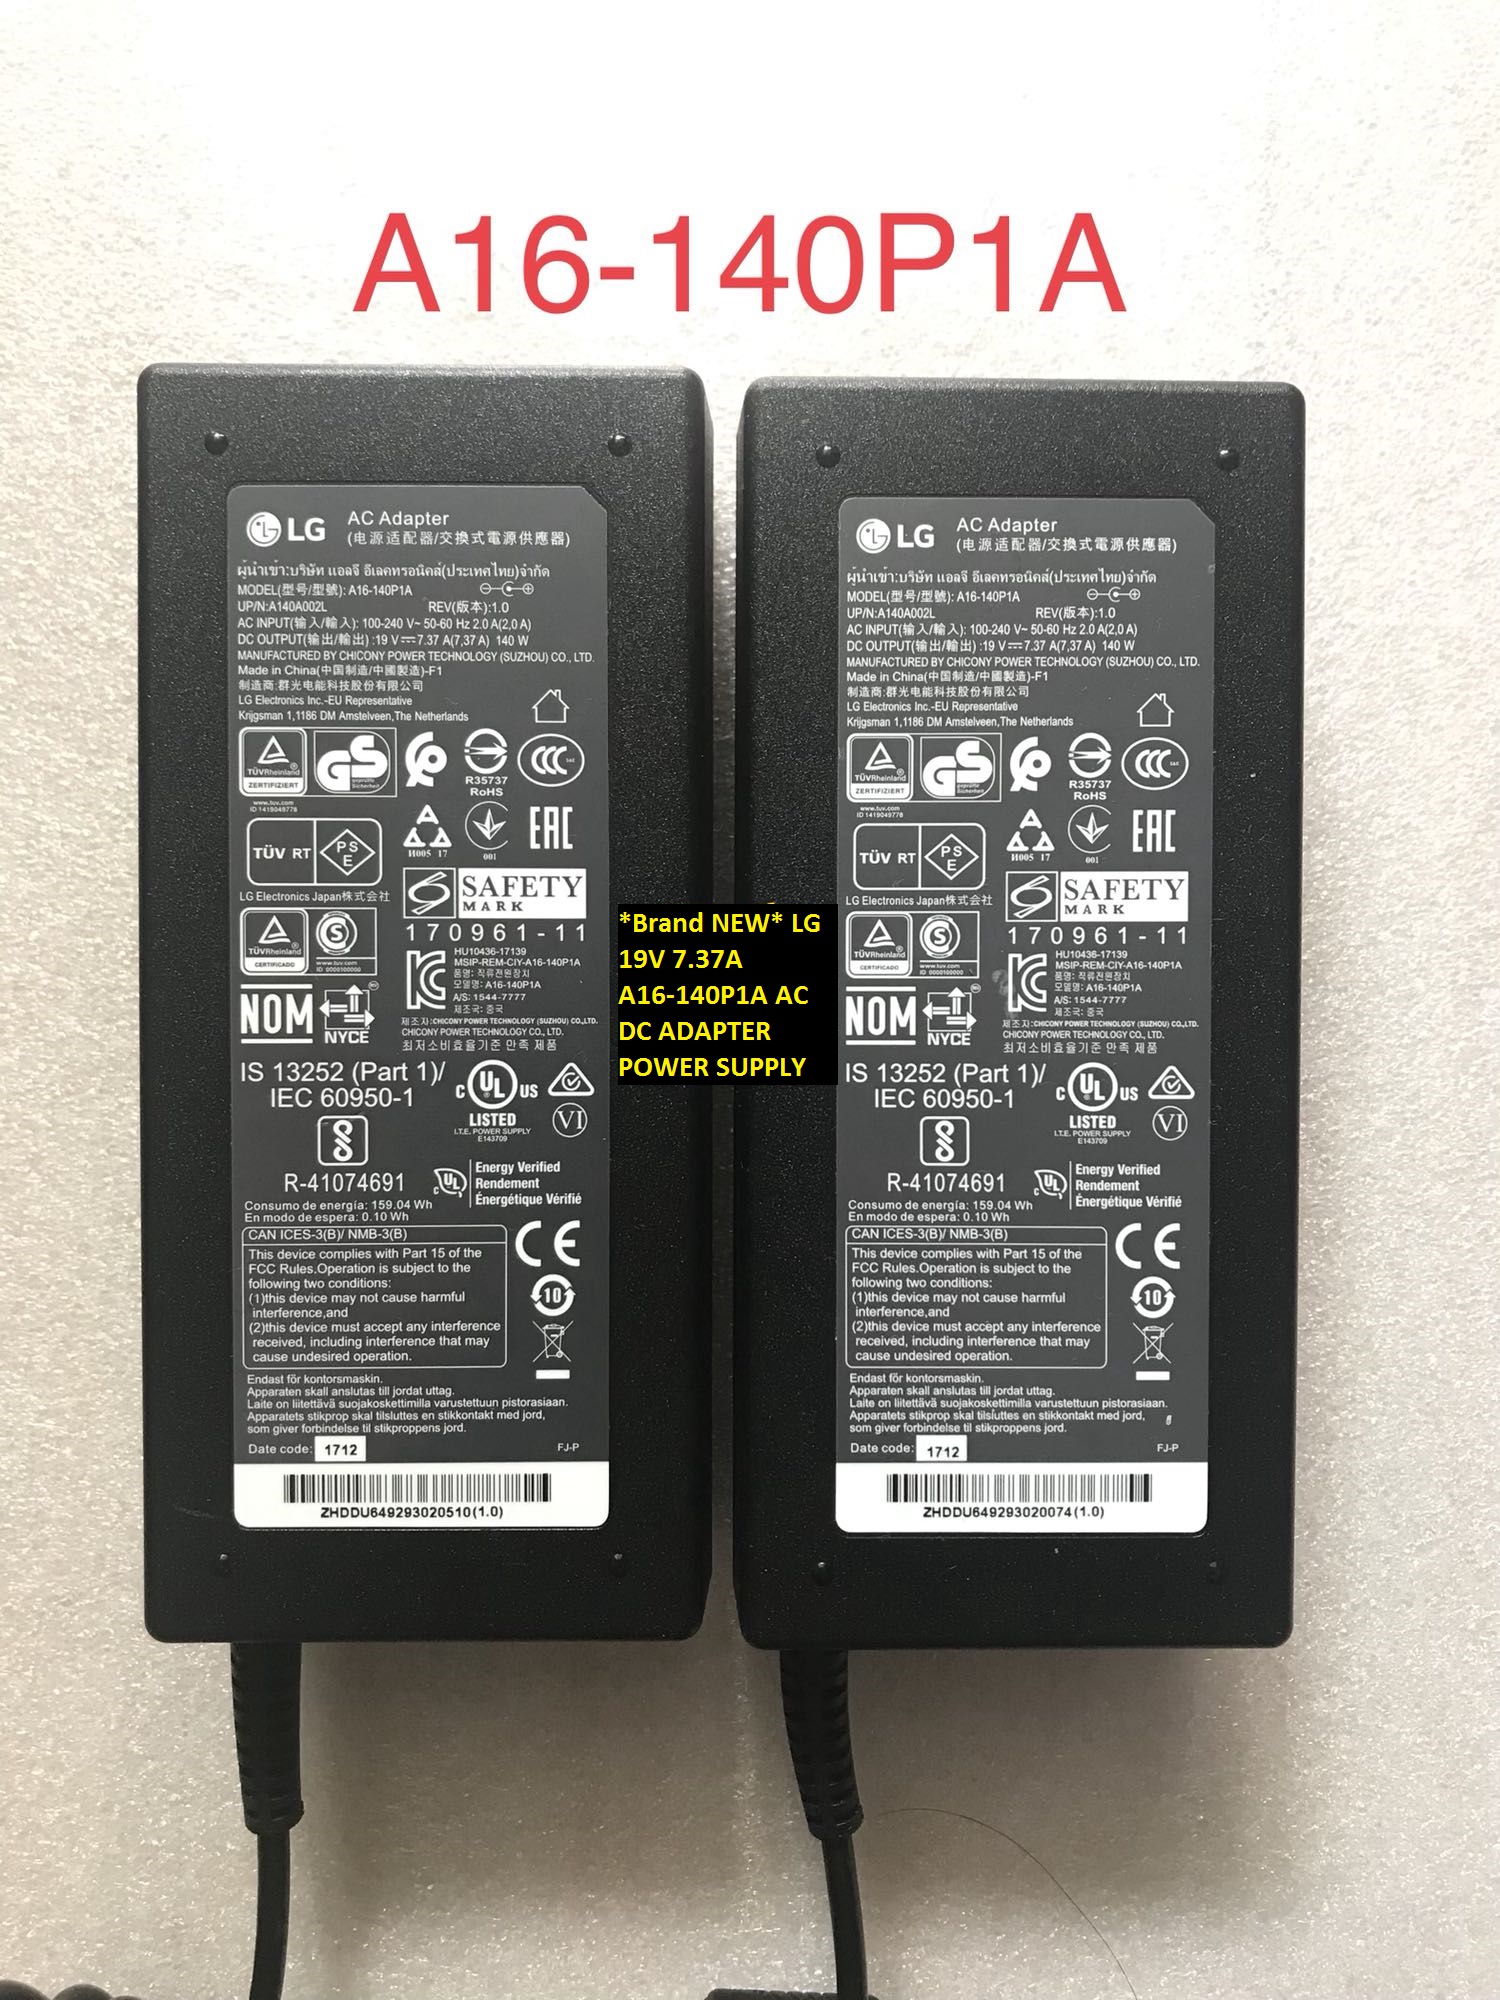 *Brand NEW*POWER SUPPLY 19V 7.37A LG A16-140P1A AC DC ADAPTER